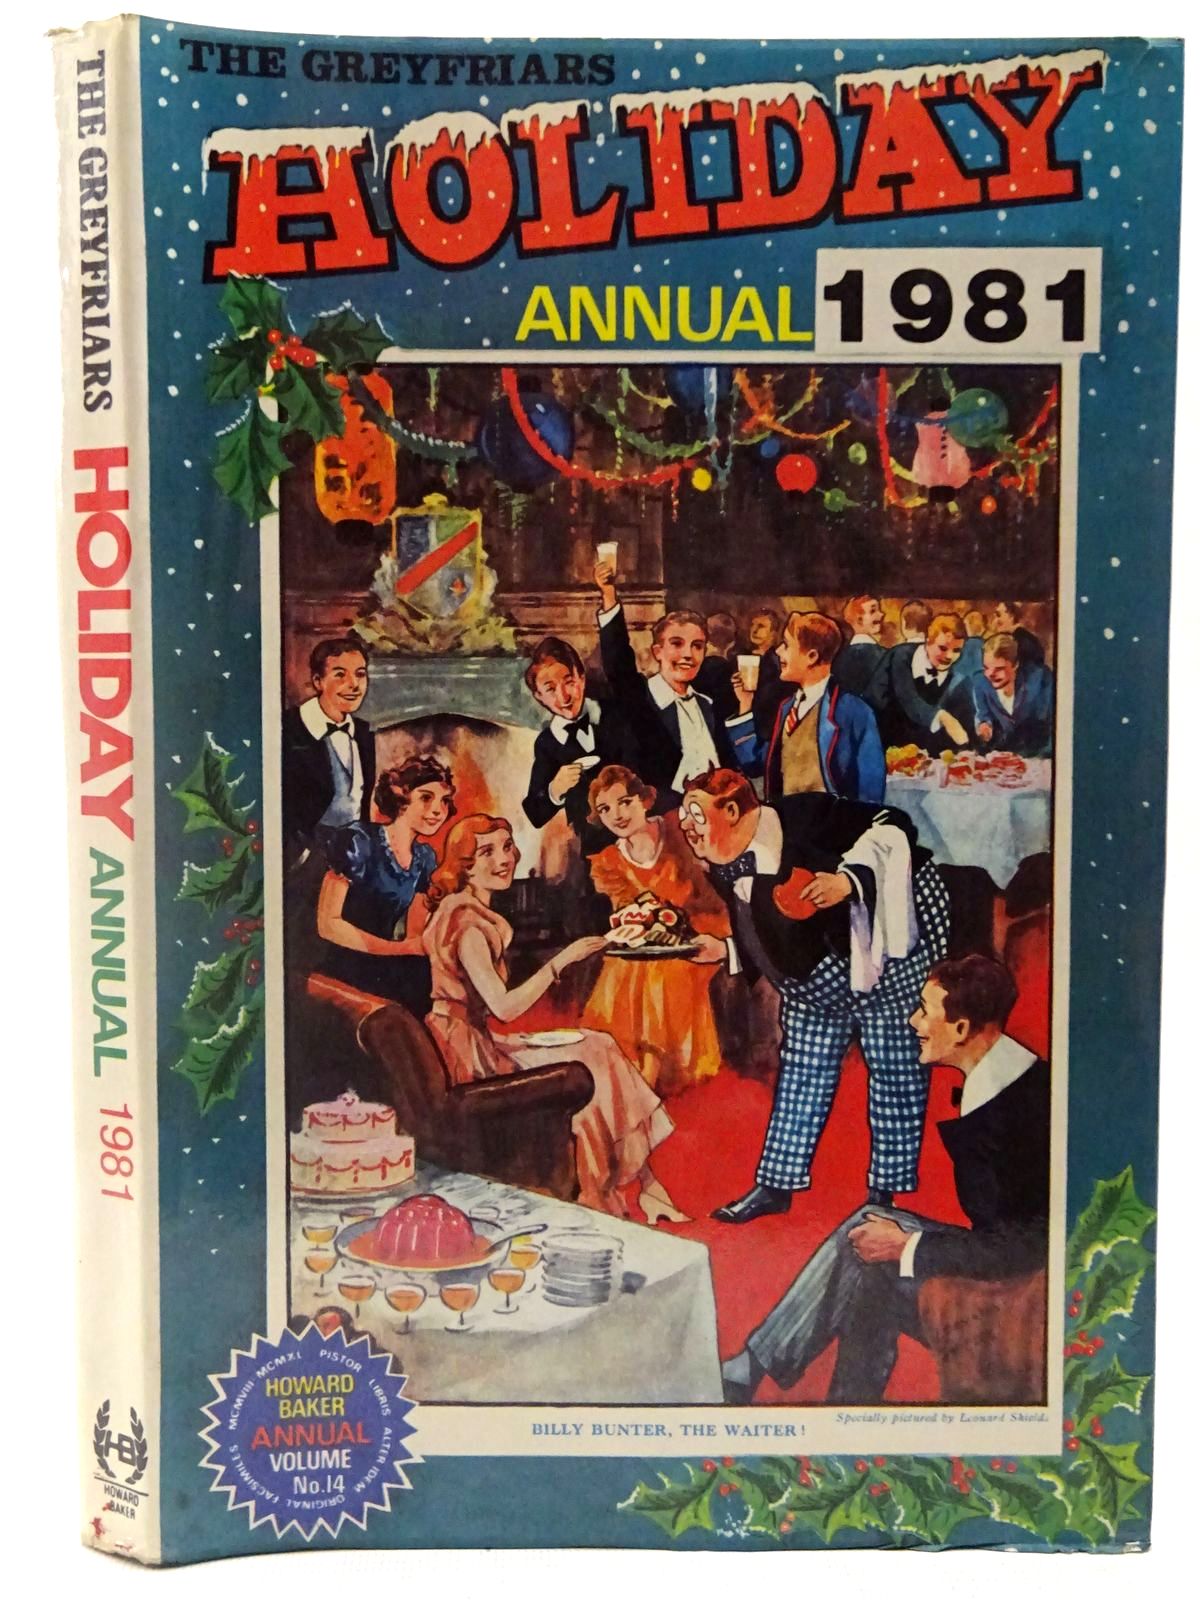 Photo of THE GREYFRIARS HOLIDAY ANNUAL 1981 written by Richards, Frank published by Howard Baker Press (STOCK CODE: 2126982)  for sale by Stella & Rose's Books